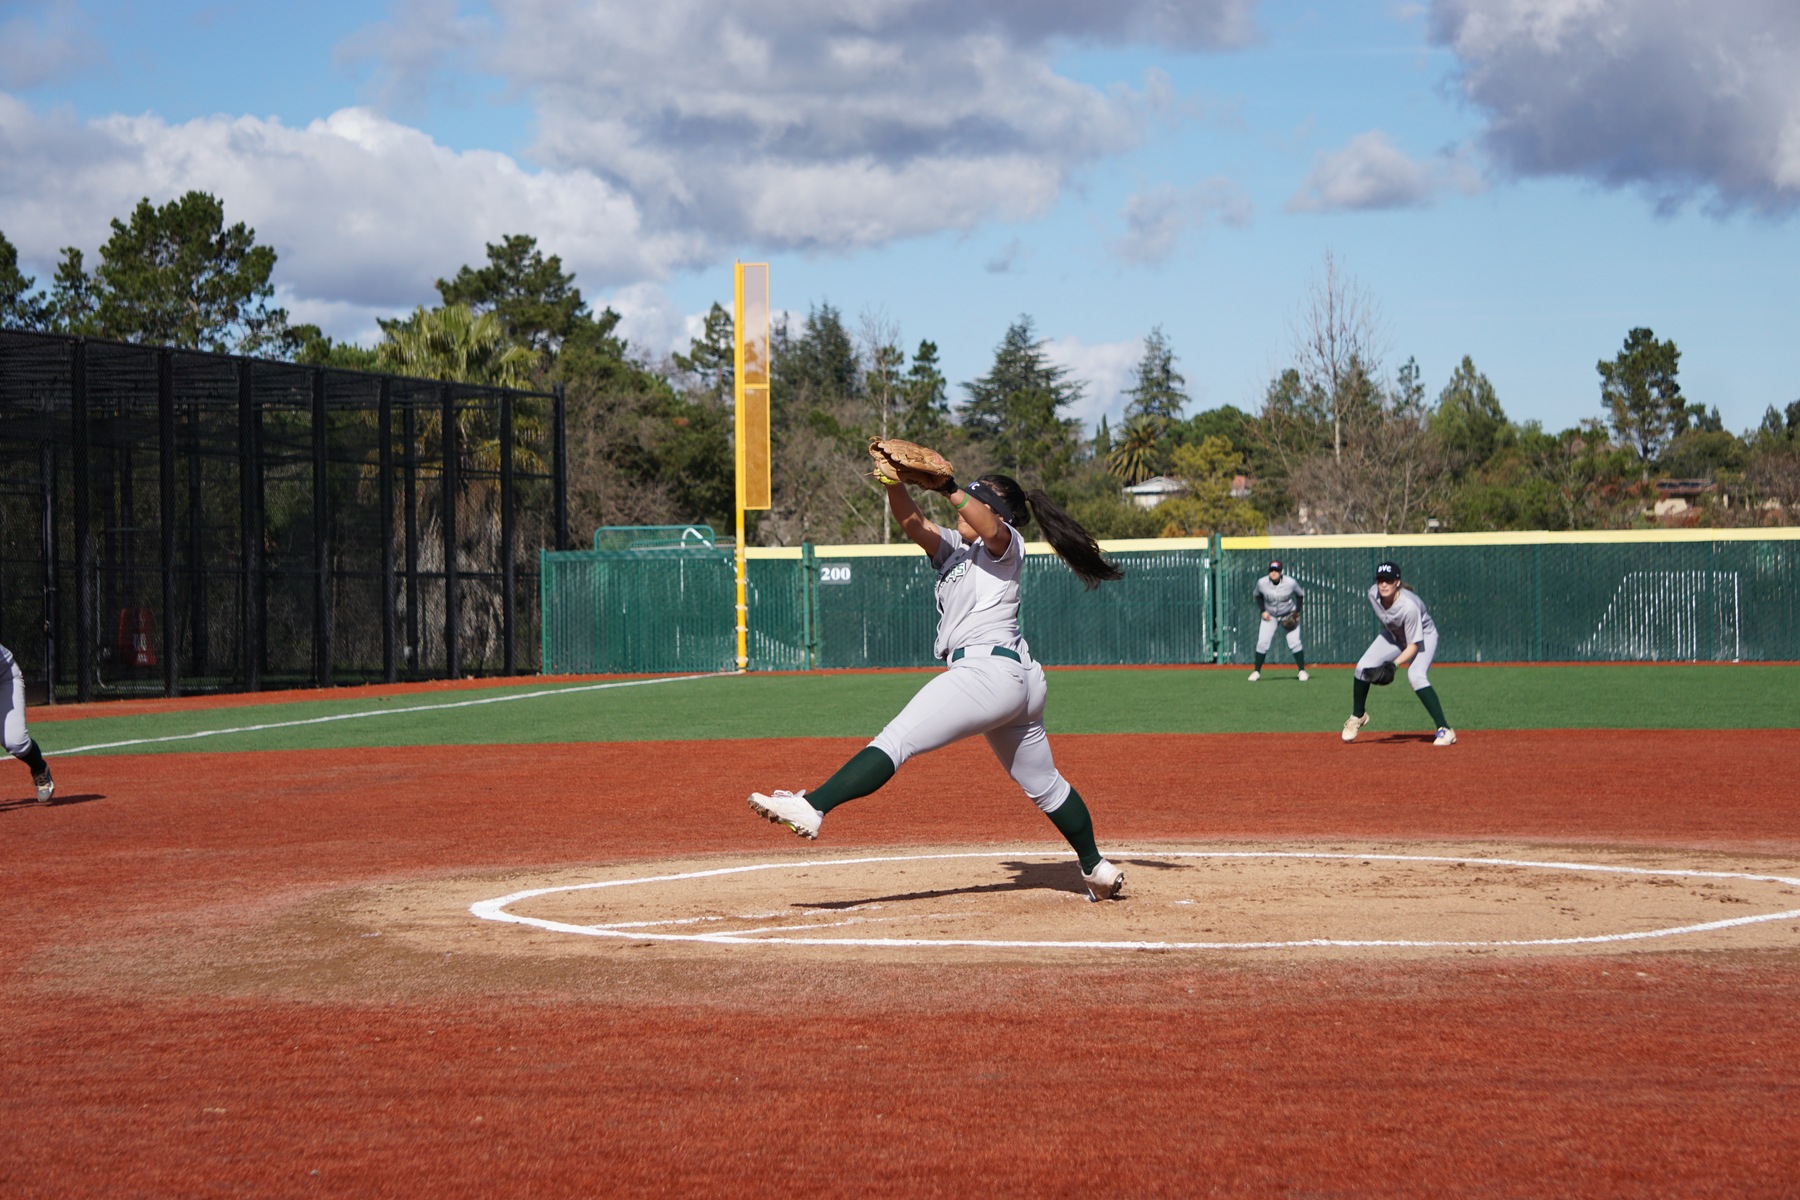 Four RBI Day For Kathryn Cassin Seals The Deal In Vikings's Victory Over Chabot College